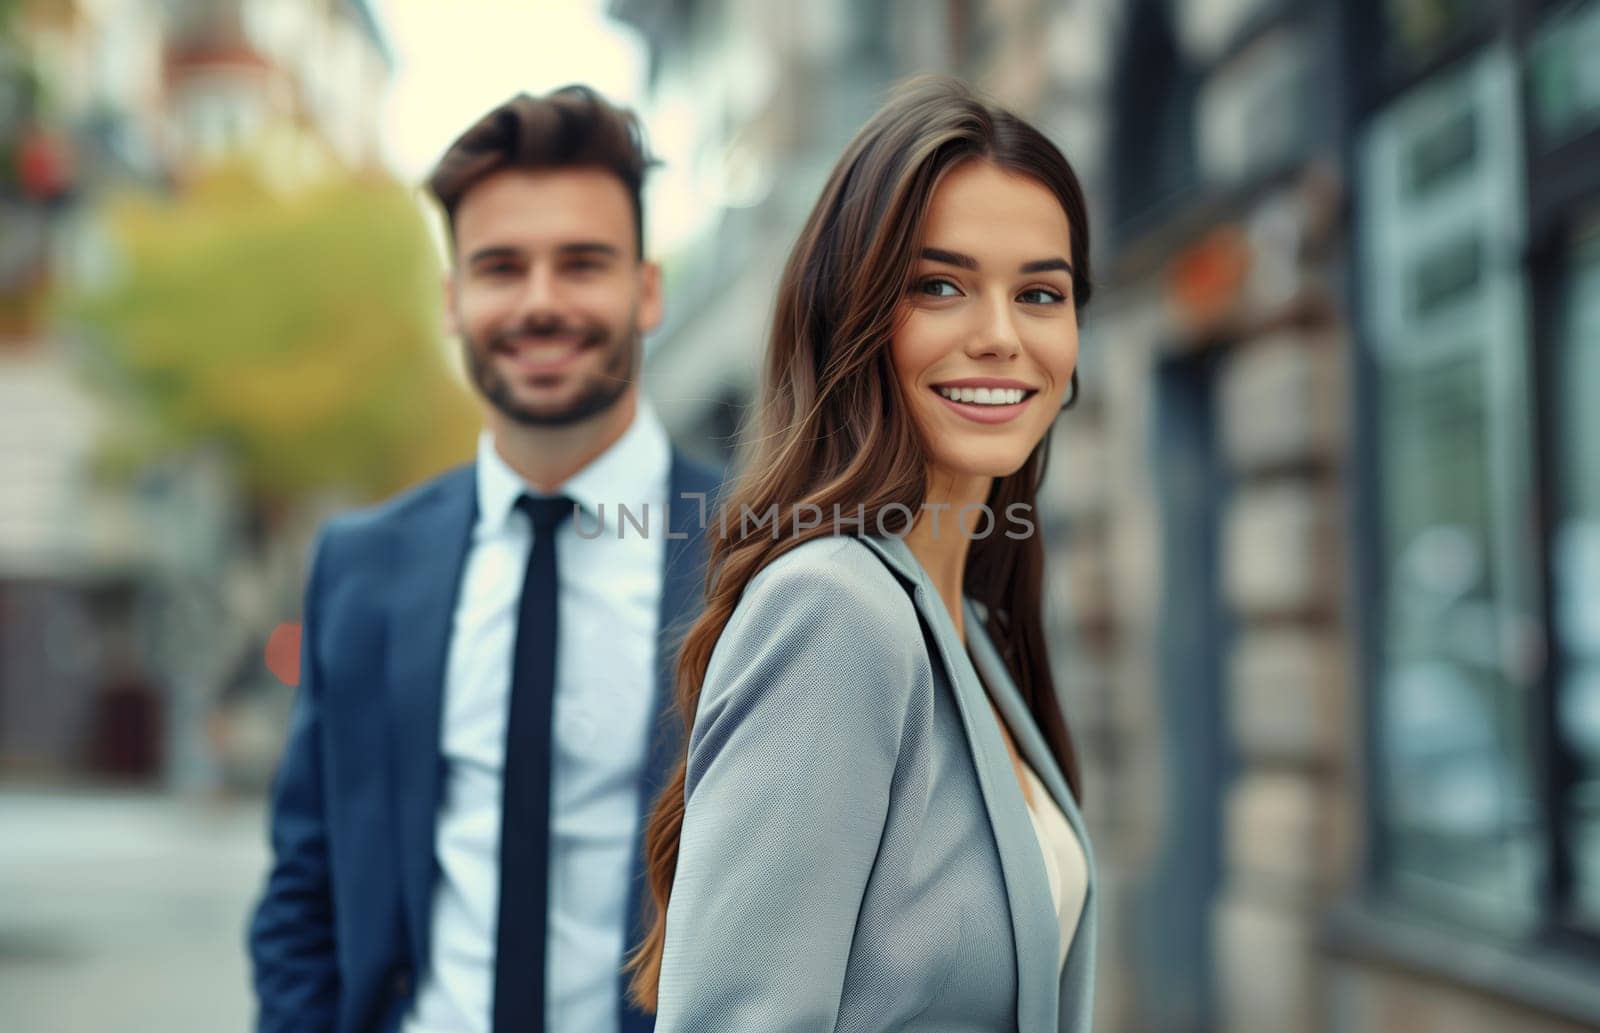 Portrait of beautiful happy smiling young woman and man in business suit, couple coworkers together on city street